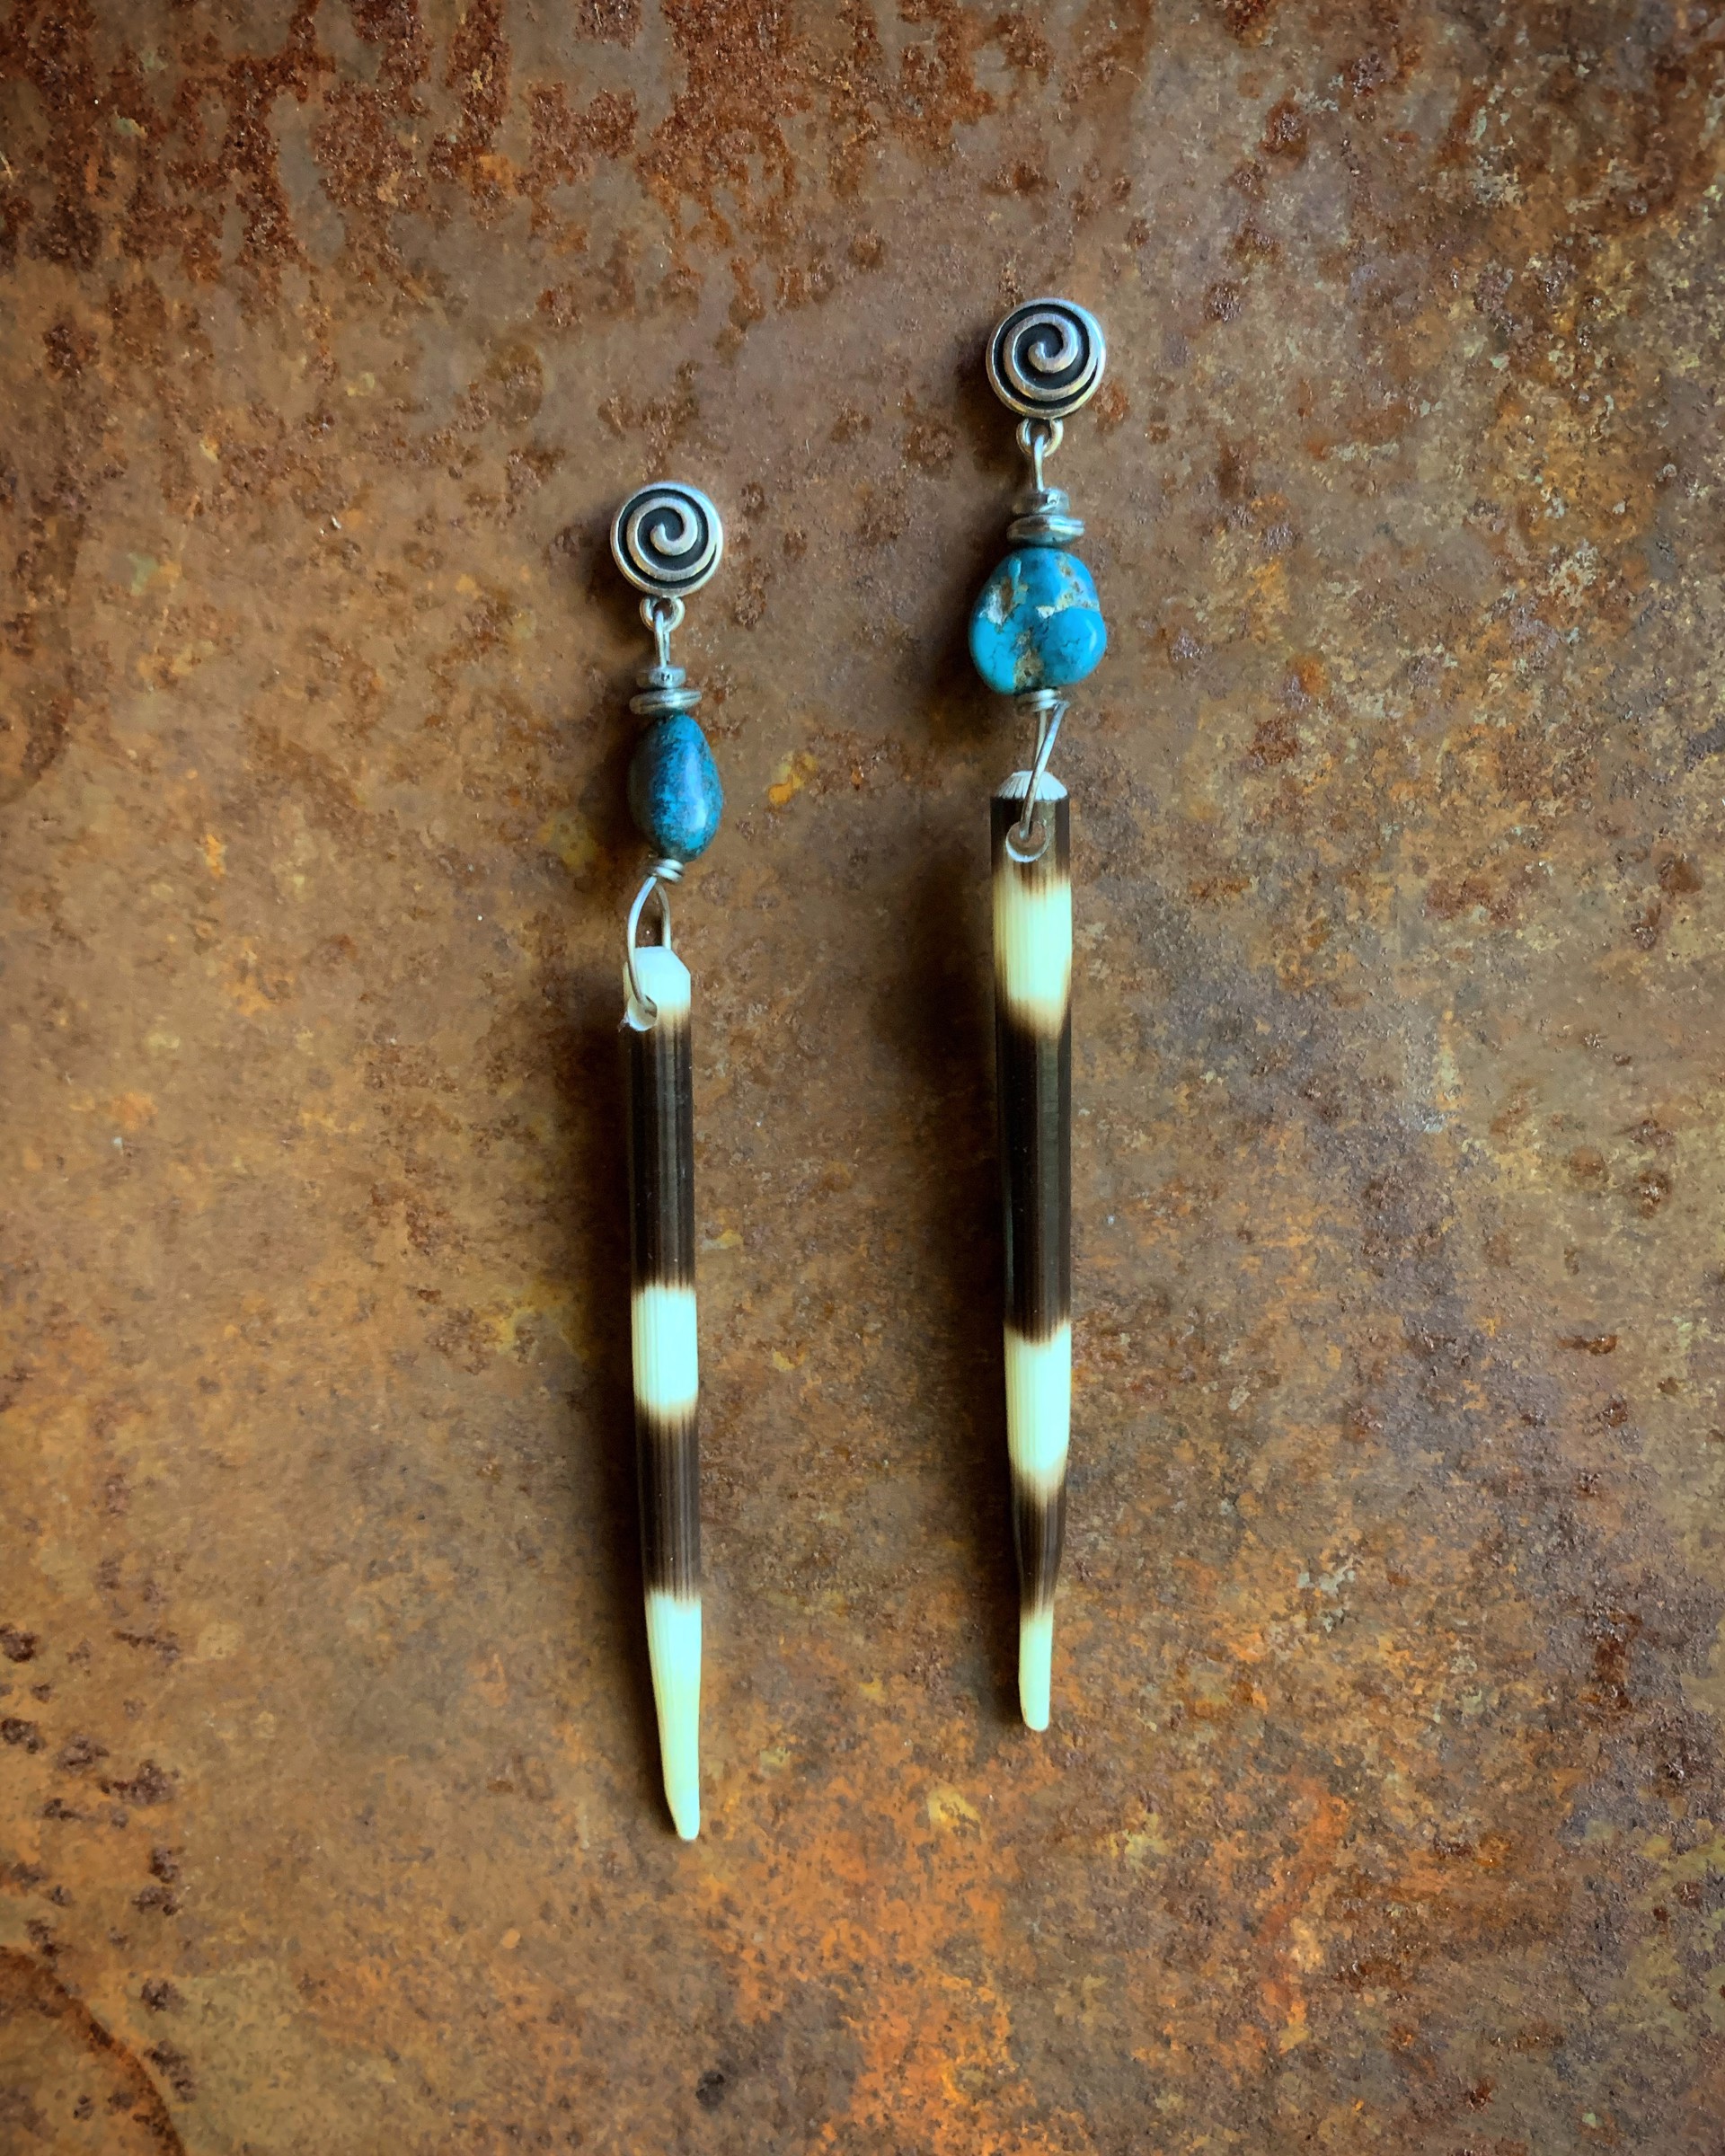 K503 African Procupine Quills with Turquiose by Kelly Ormsby